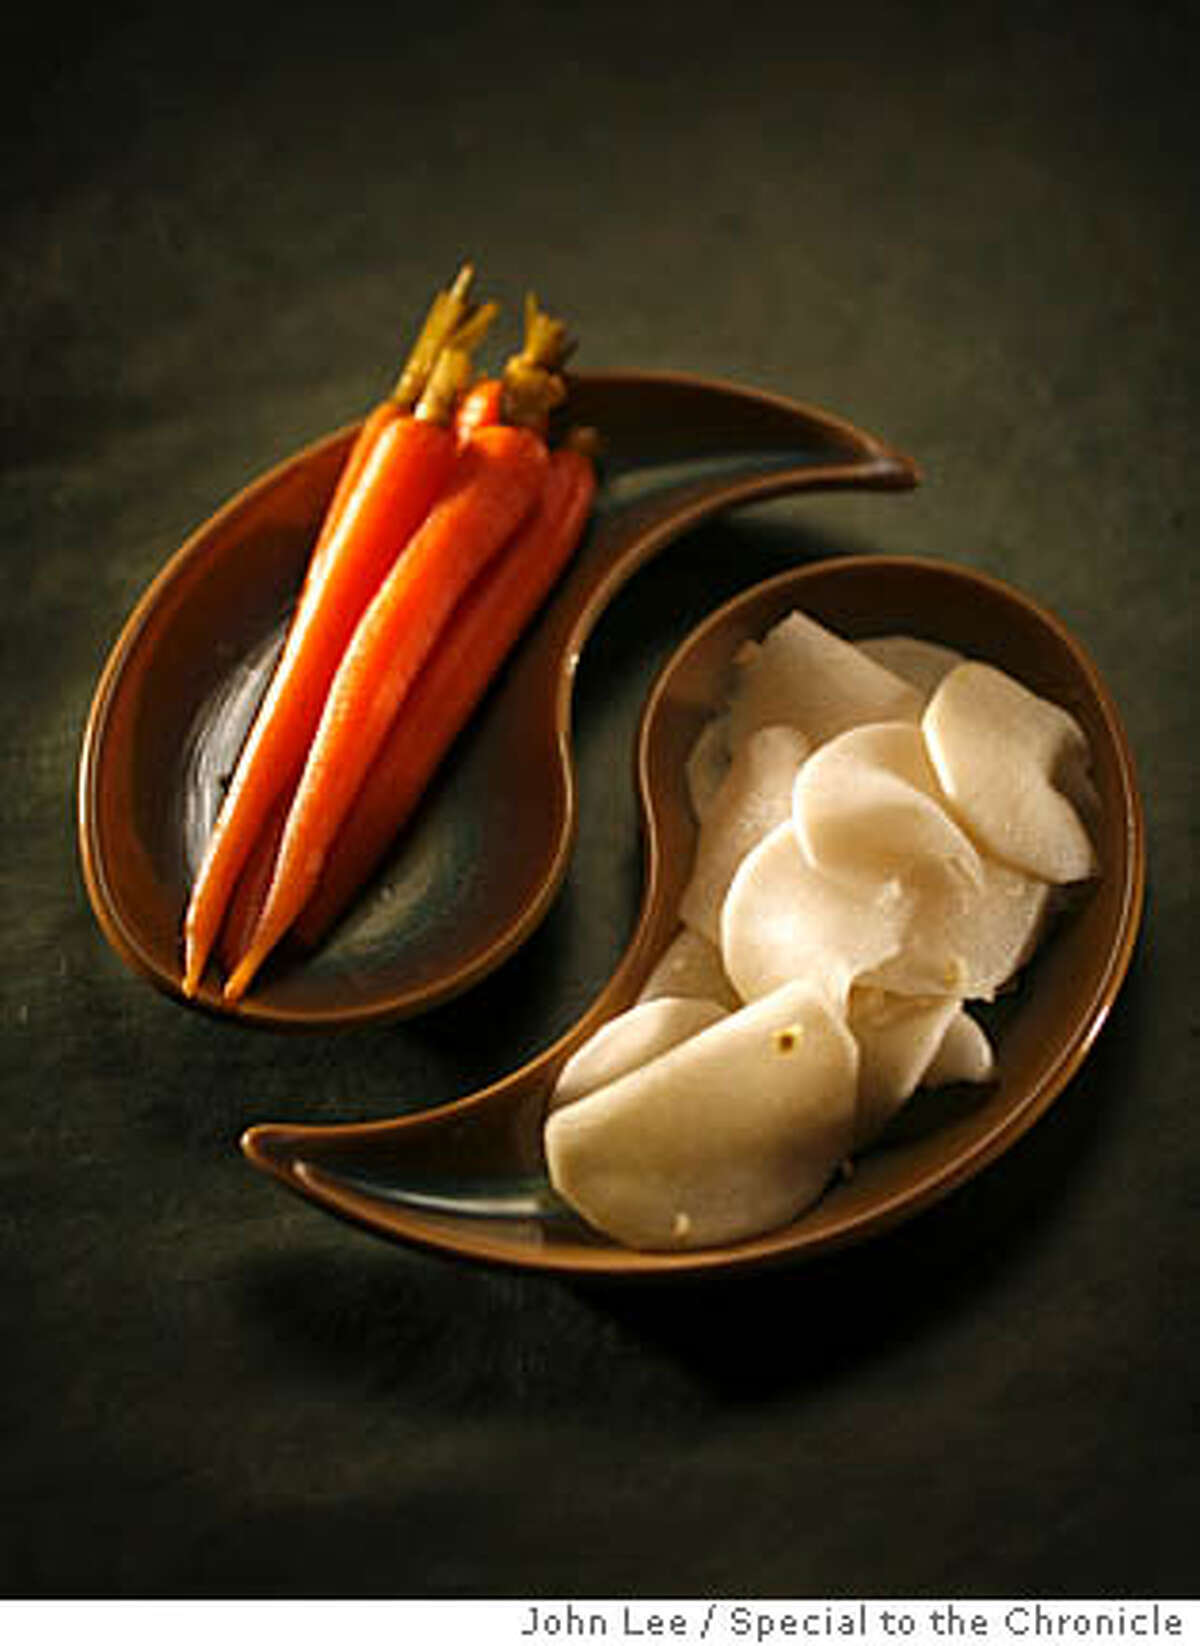 SEASONAL_30_JOHNLEE.JPG Pickle recipes for Seasonal Cook. By JOHN LEE/SPECIAL TO THE CHRONICLE Ran on: 01-30-2008 Pickled Carrots from Bar Bambino and Quick Pickled Daikon with Lemon, at right. See recipes, F4.